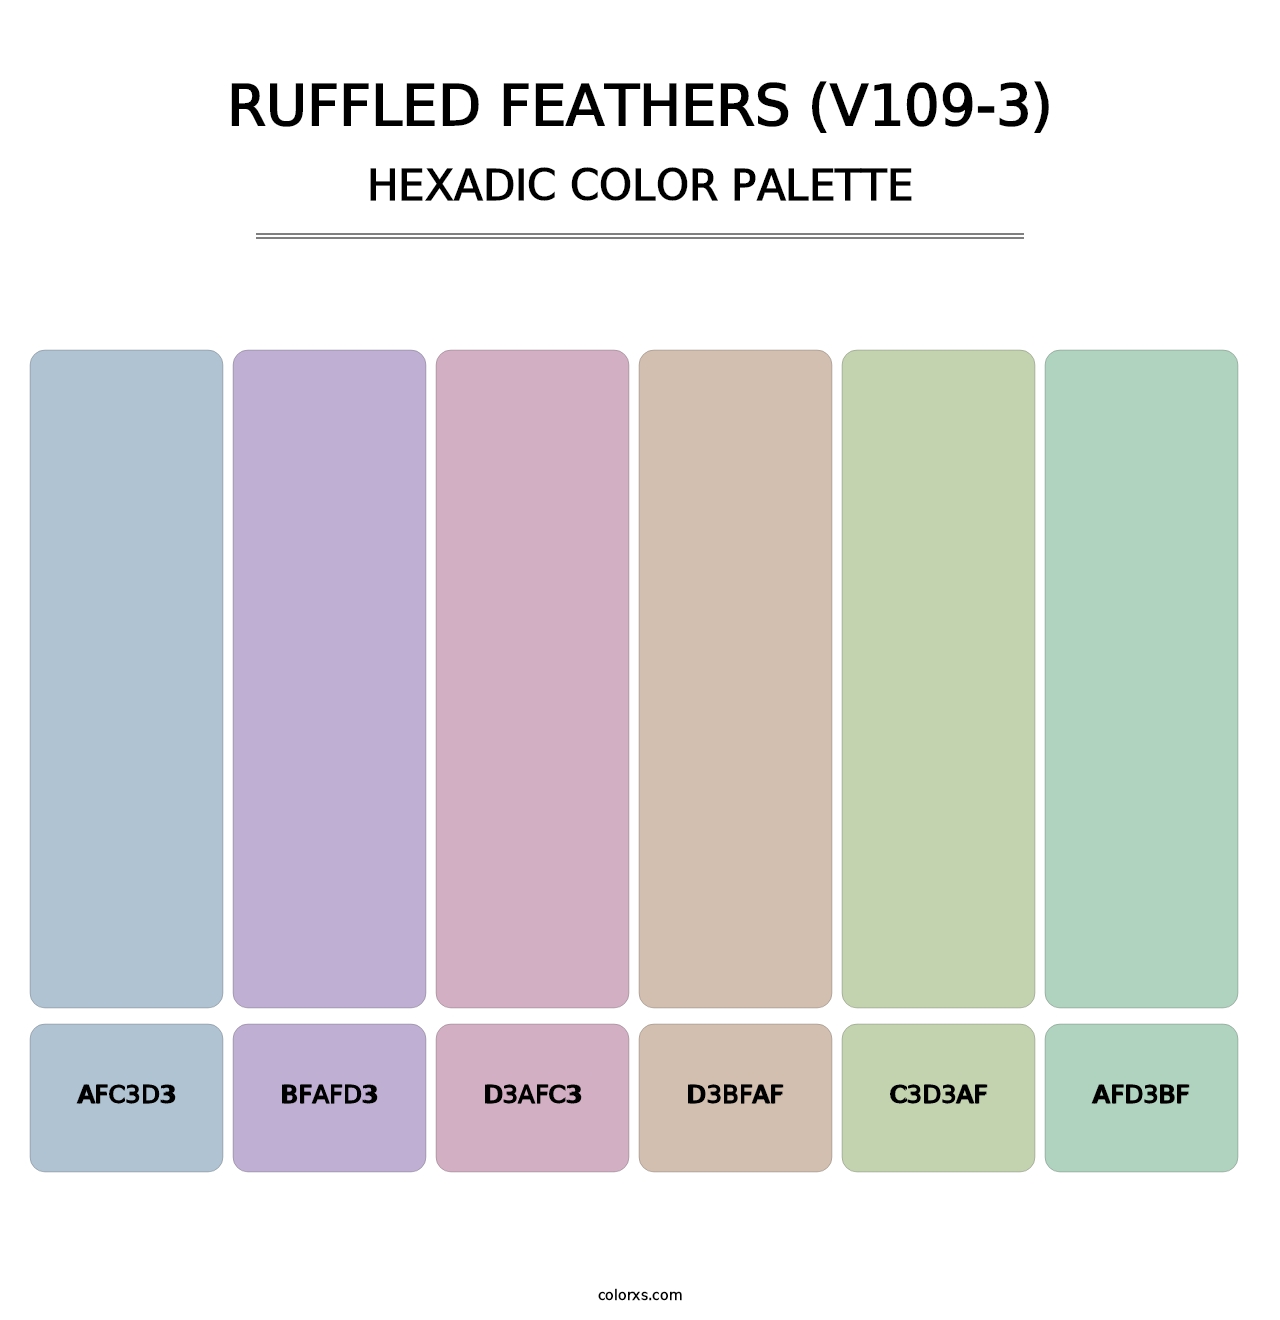 Ruffled Feathers (V109-3) - Hexadic Color Palette